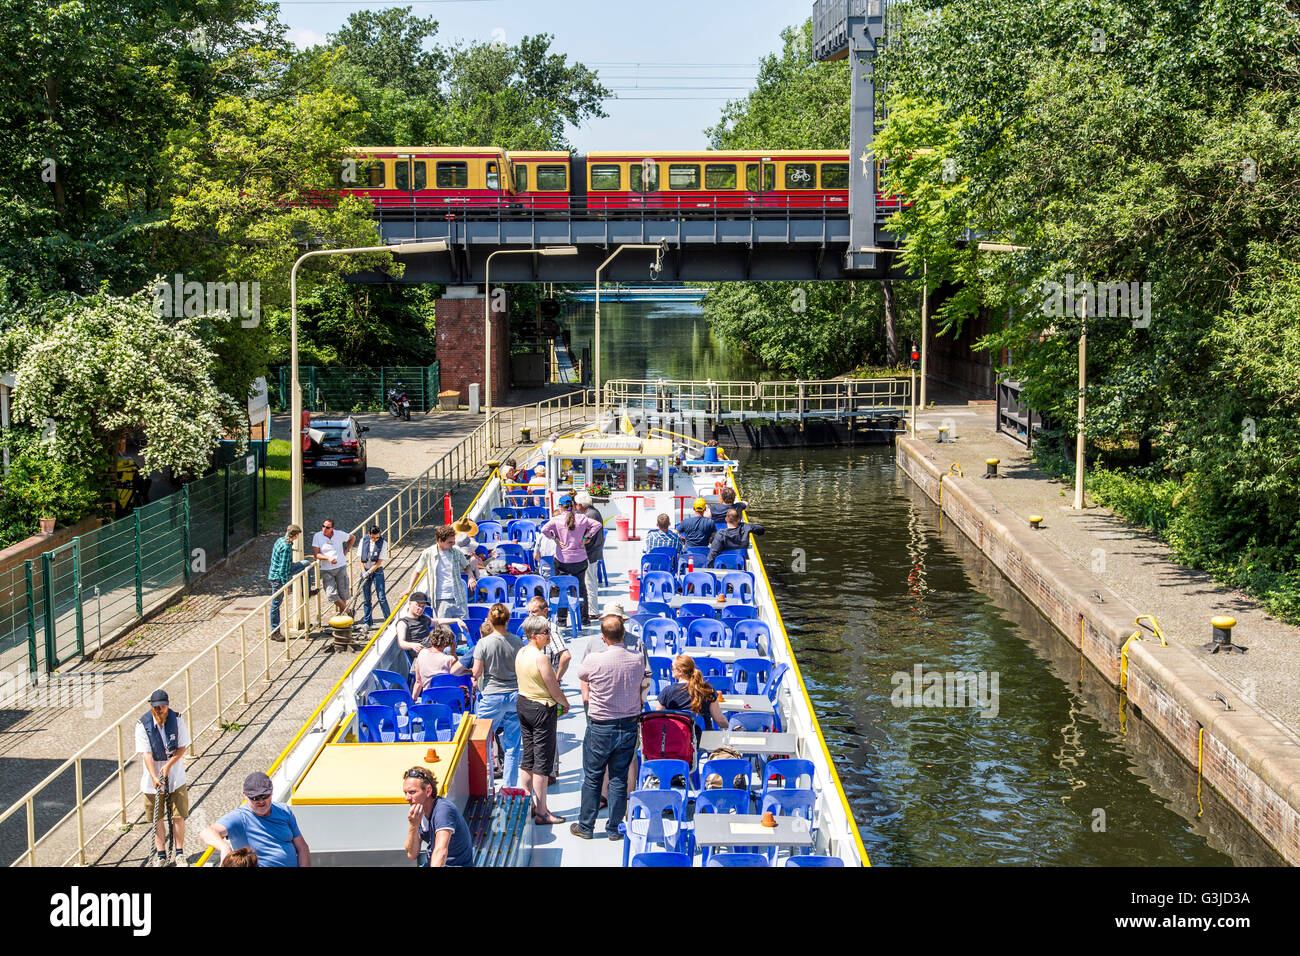 Sightseeing boat on the Landwehr Canal in the channel lock in the Tiergarten district, Berlin, Germany Stock Photo